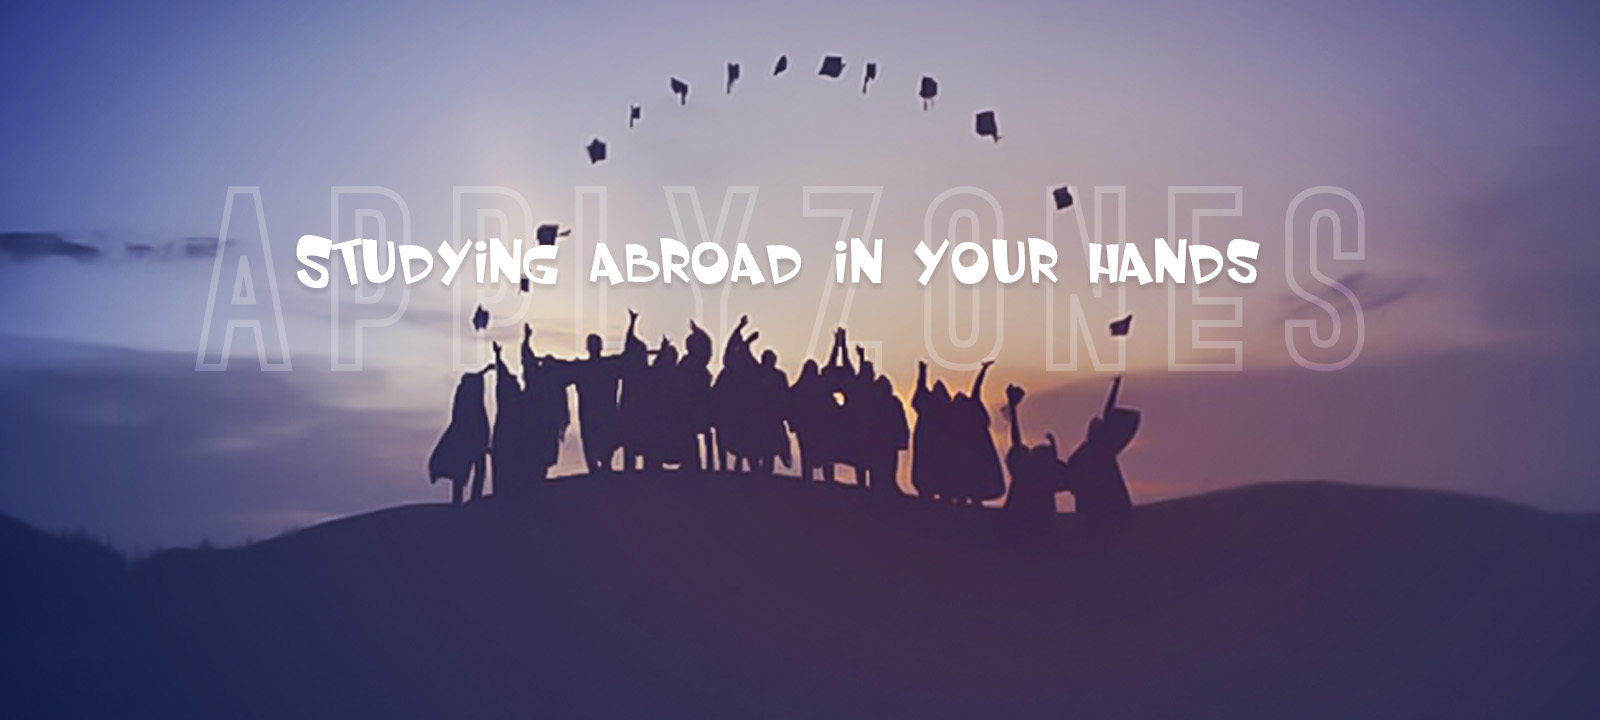 Aplyzones - studying abroad in your hands